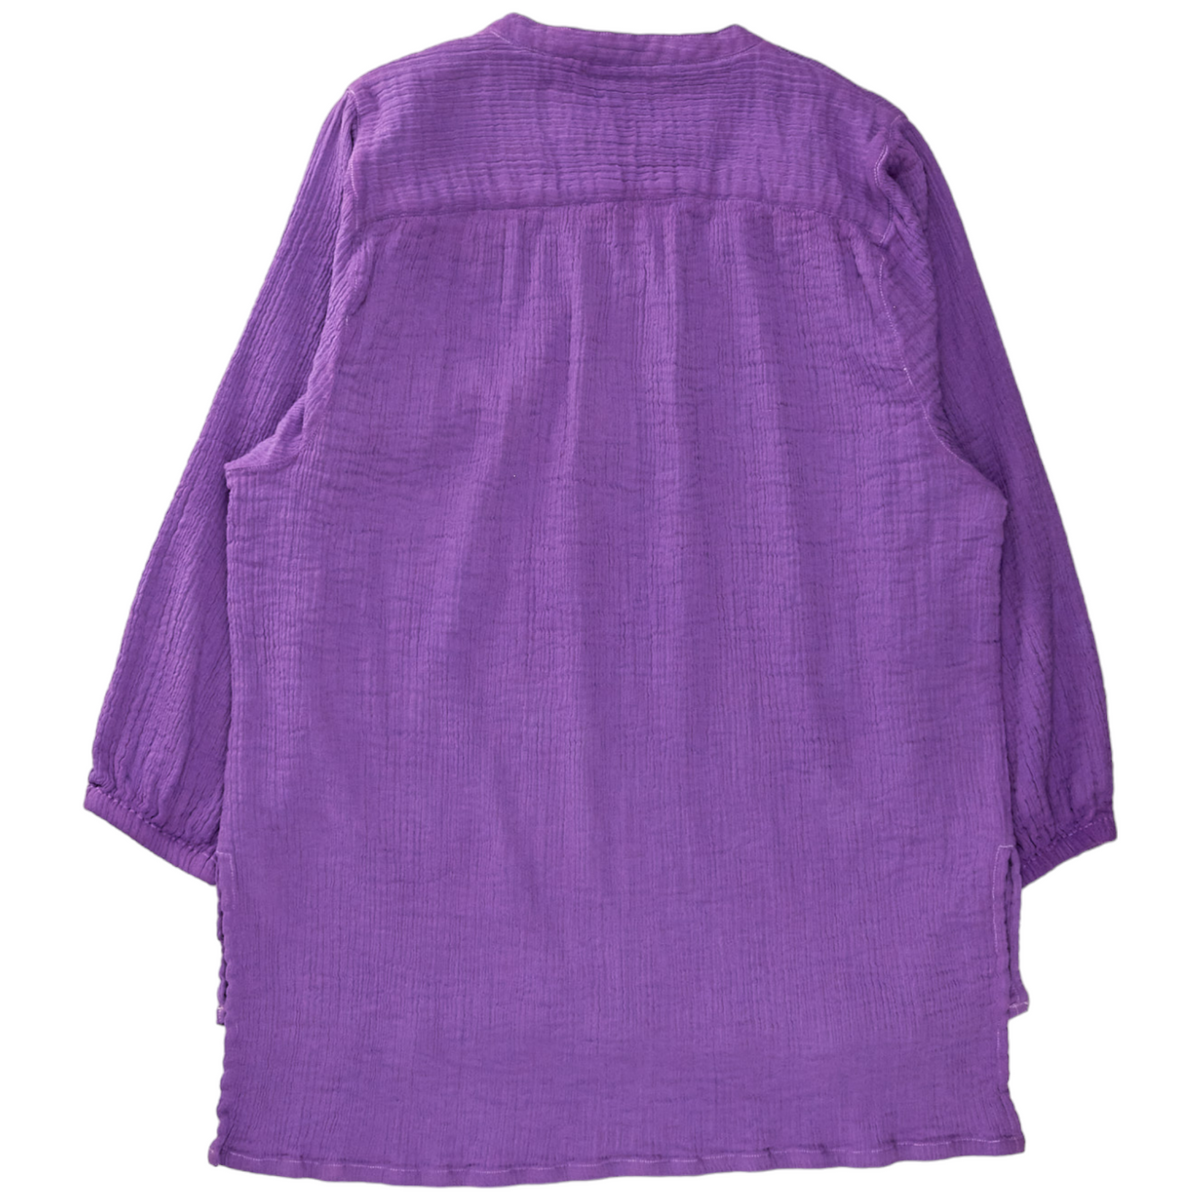 NRBY Purple Crinkle Cotton Top